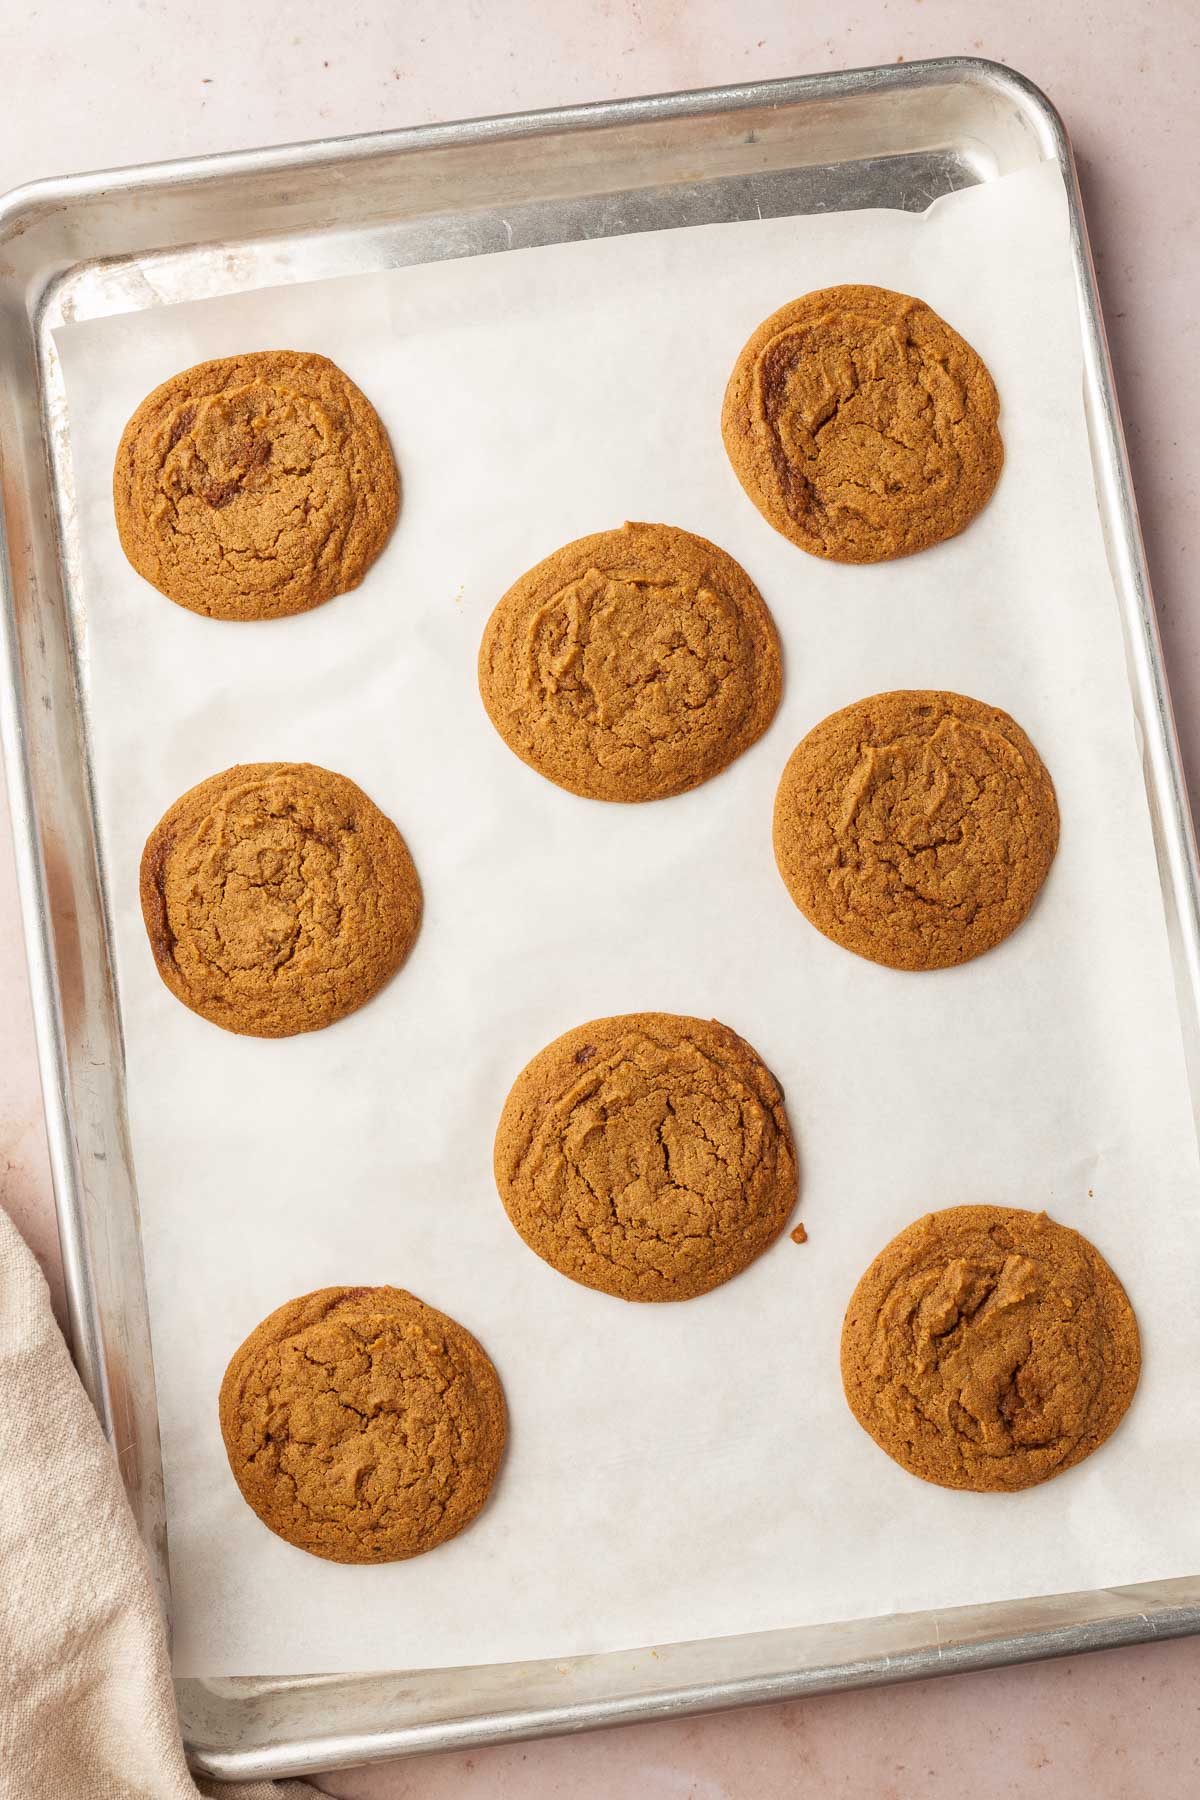 Eight gluten-free pumpkin cookies on a baking sheet lined with parchment paper.